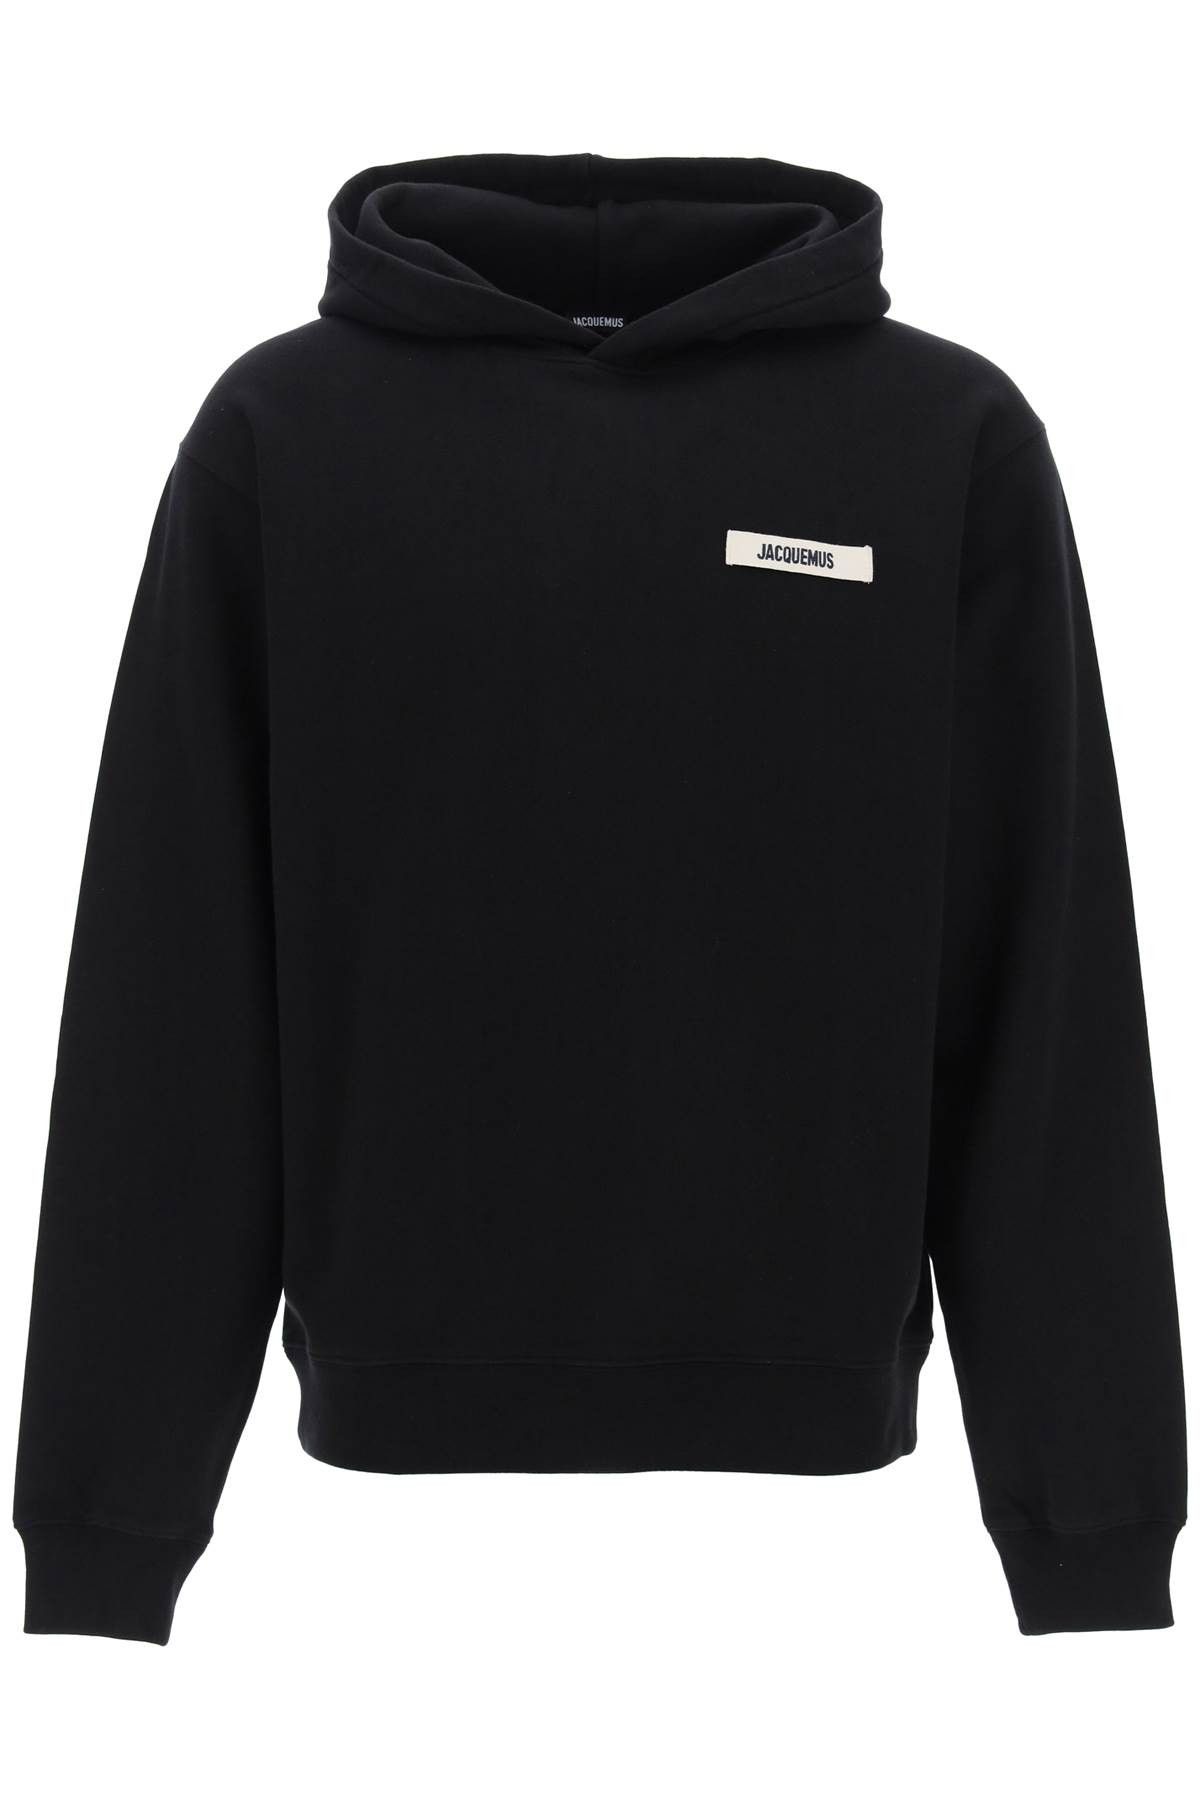 Jacquemus Le Hoodie Typo top - Green